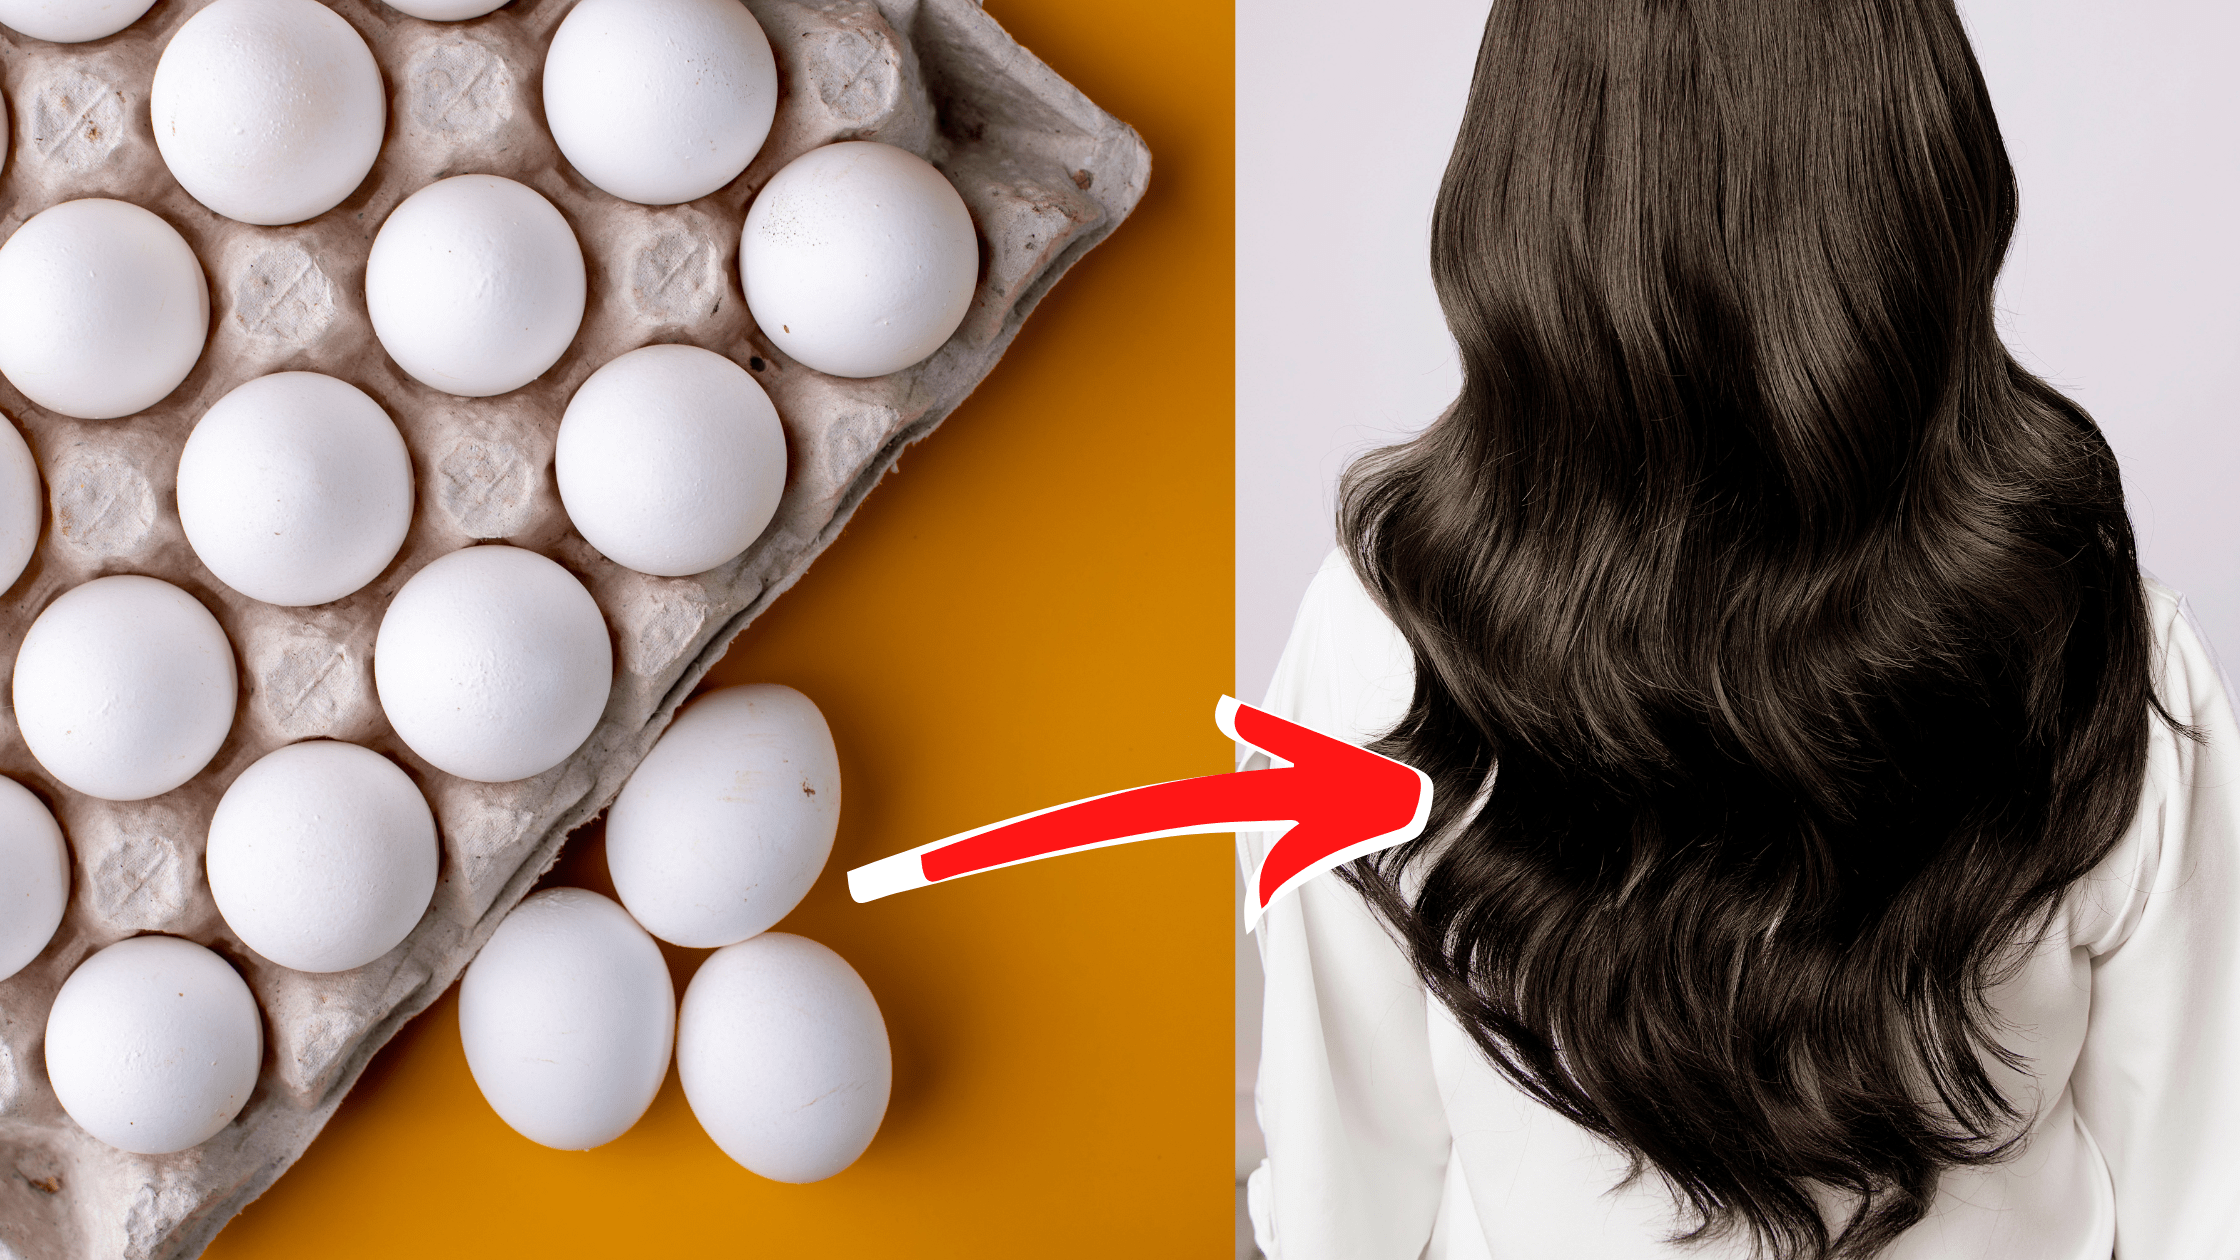 Eggs For Hair Best Ways and Tips For Healthy & Gorgeous Hair